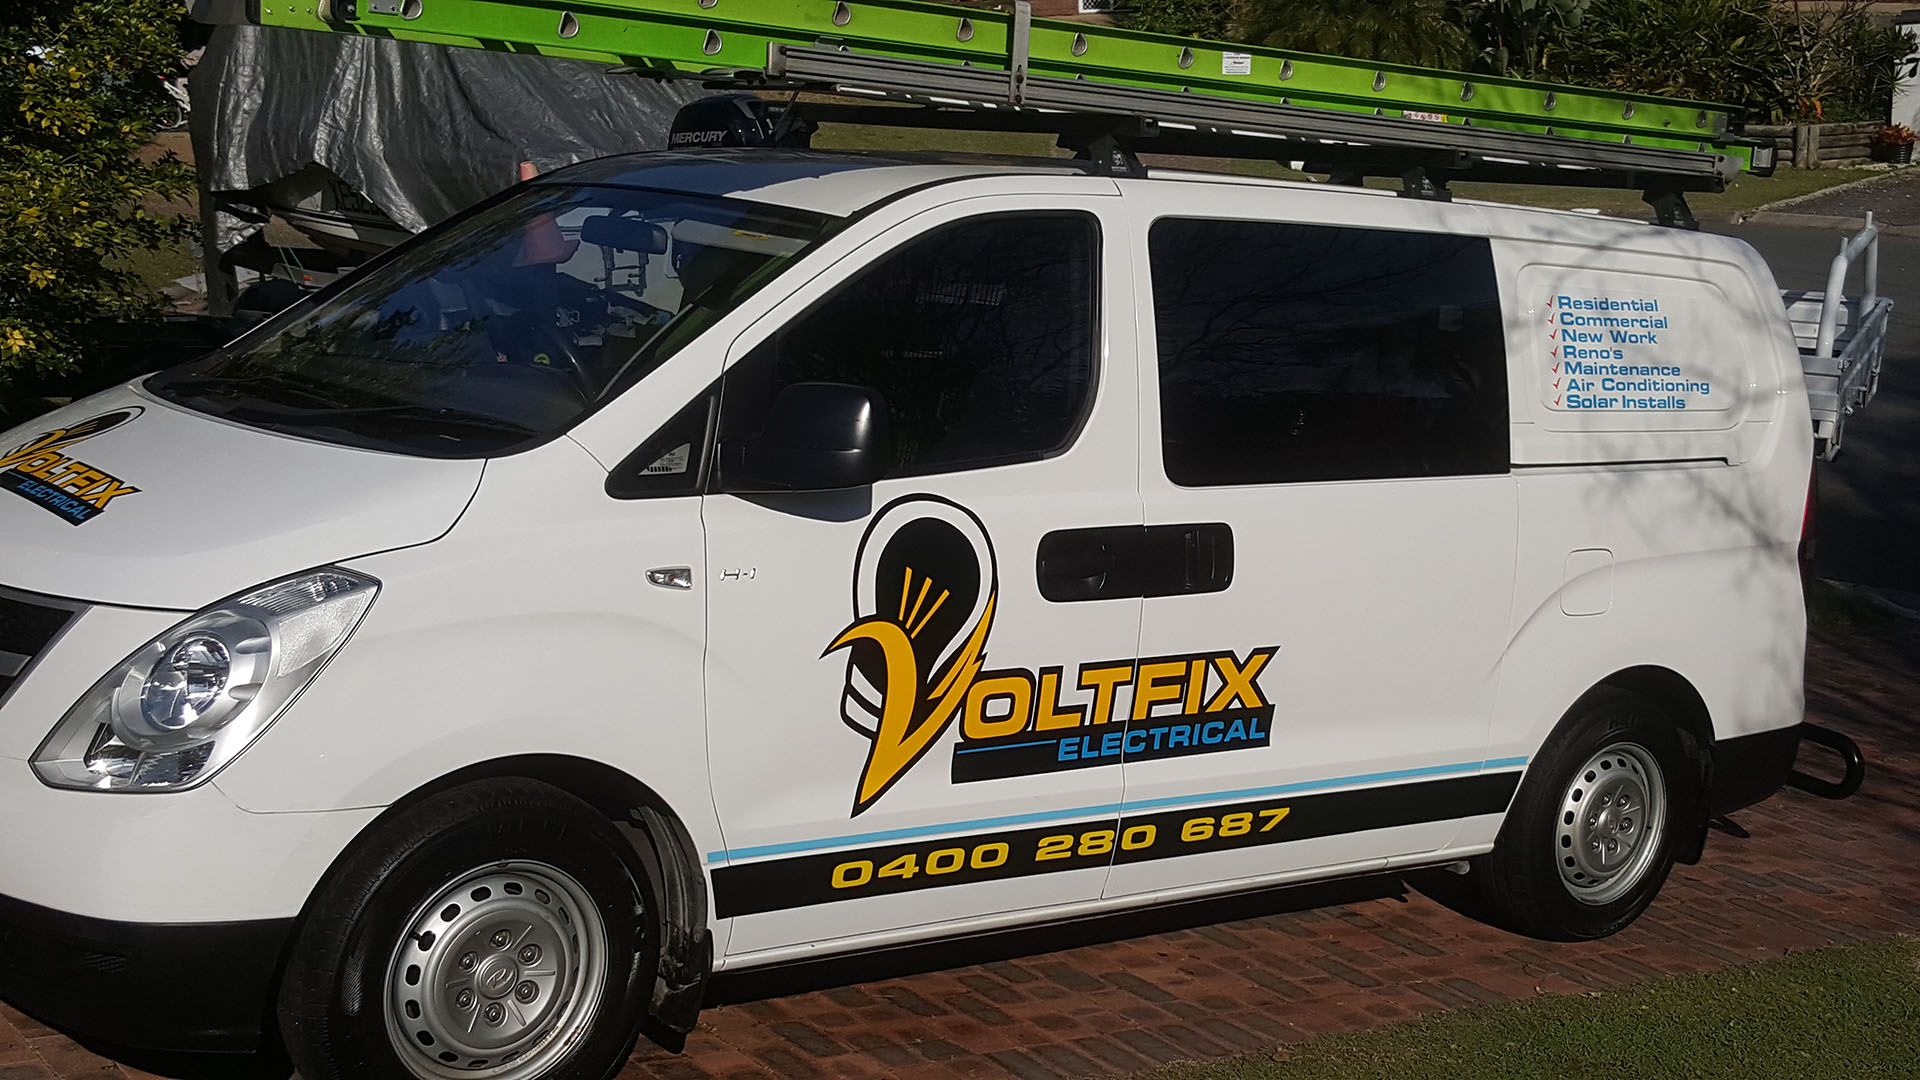 Voltfix Electrical commercial air conditioning service brisbane